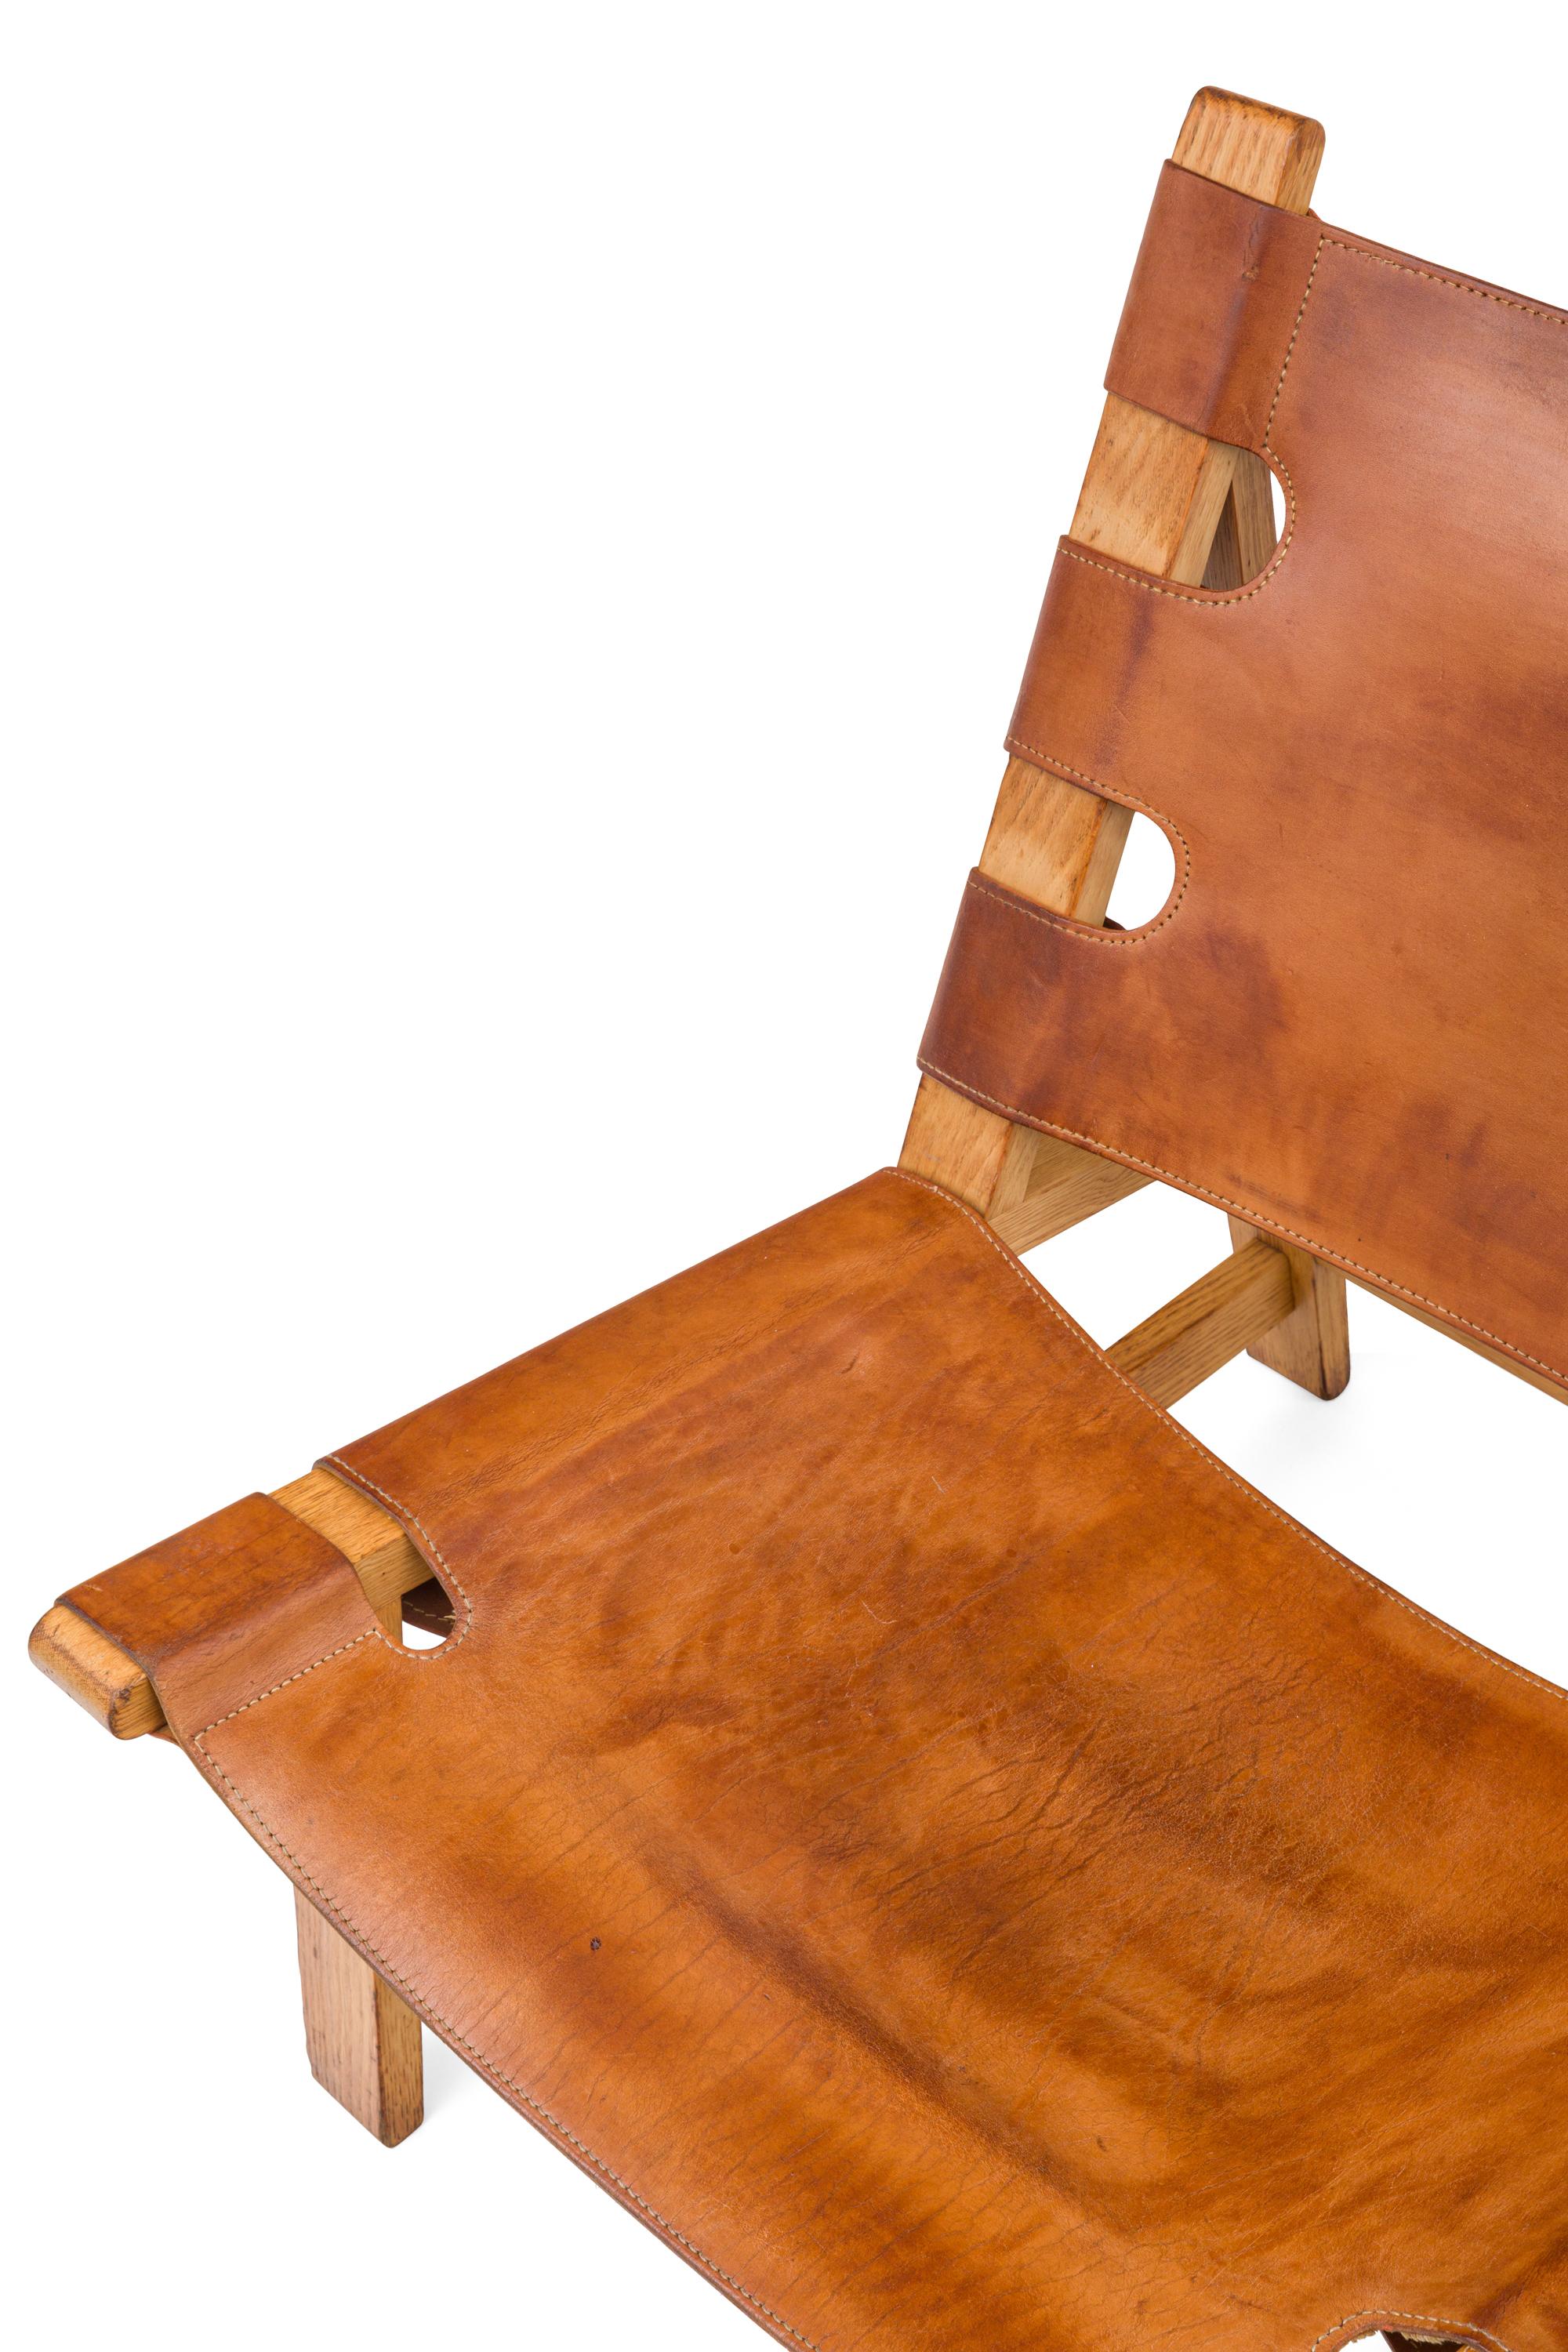 Børge Mogensen Oak and Leather Lounge Chairs, Denmark, 1960s For Sale 4